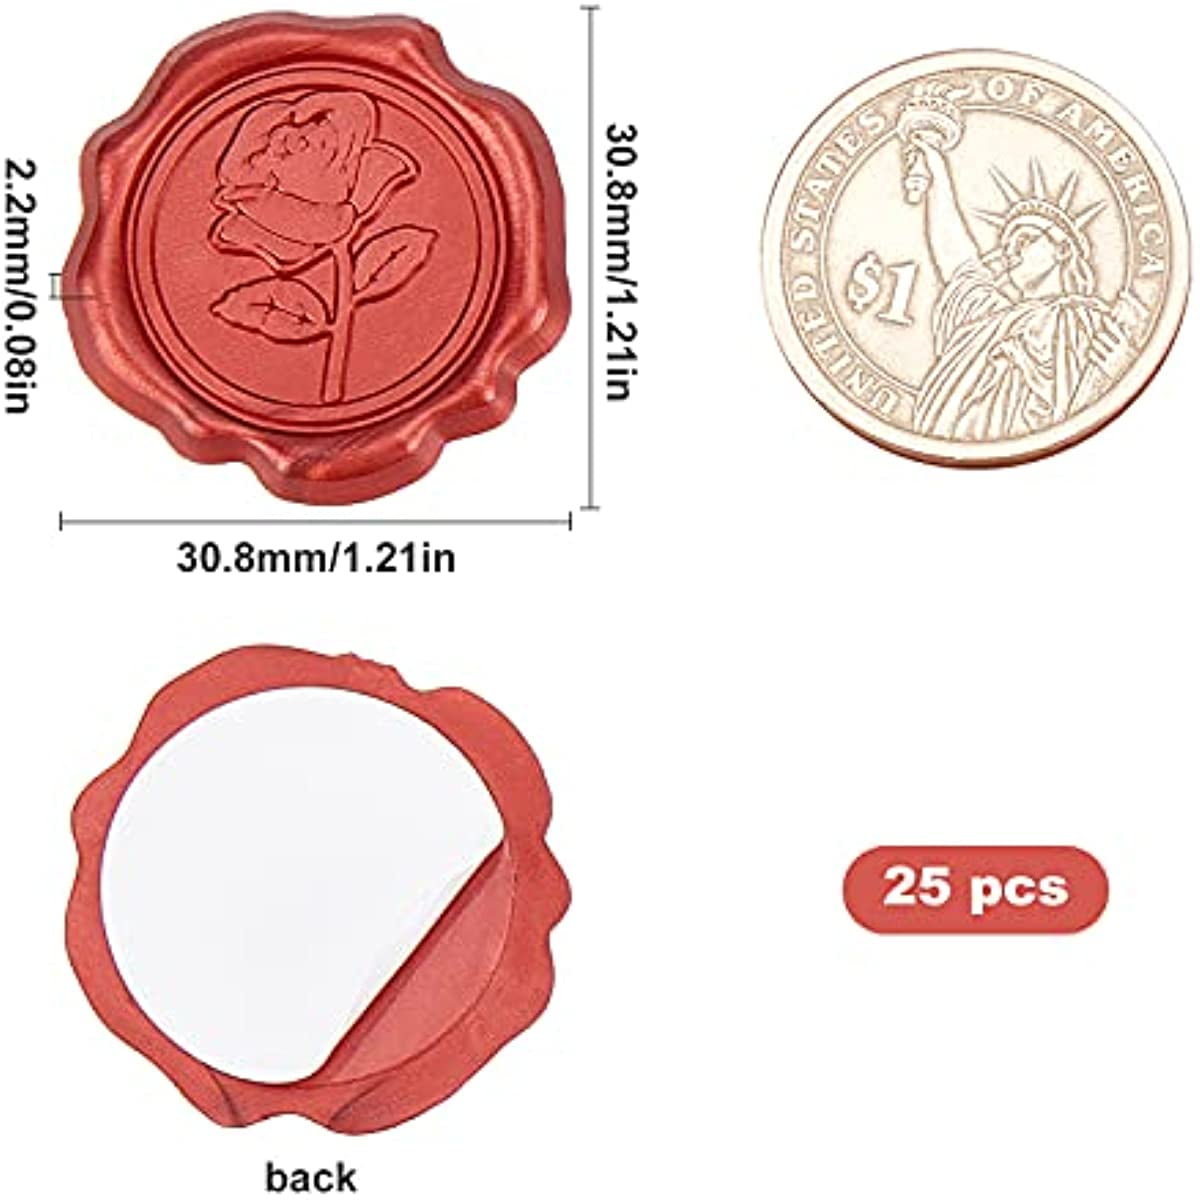 Wrapables Adhesive Wax Seal Stickers for Envelopes, Wedding Invitations, Christmas Packages, Gifts, Parties (30pcs) Bronze Rose